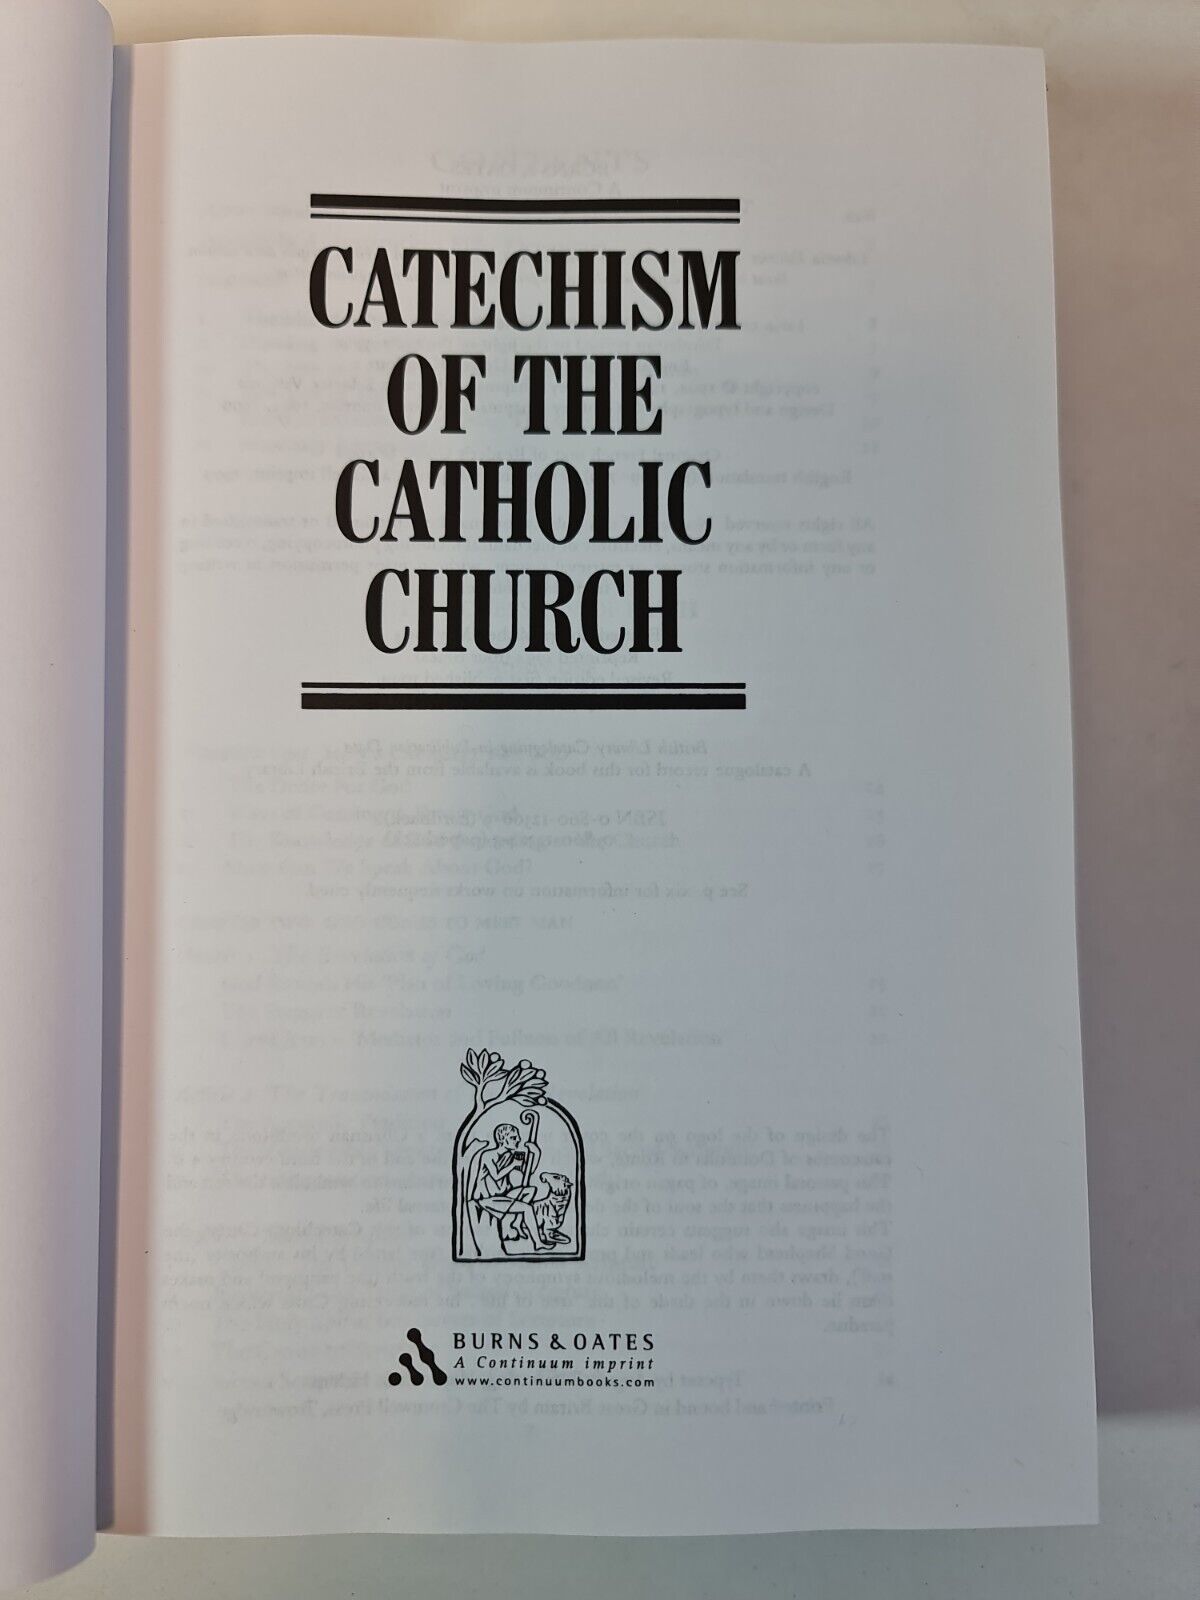 Catechism of the Catholic Church by The Vatican (2004)